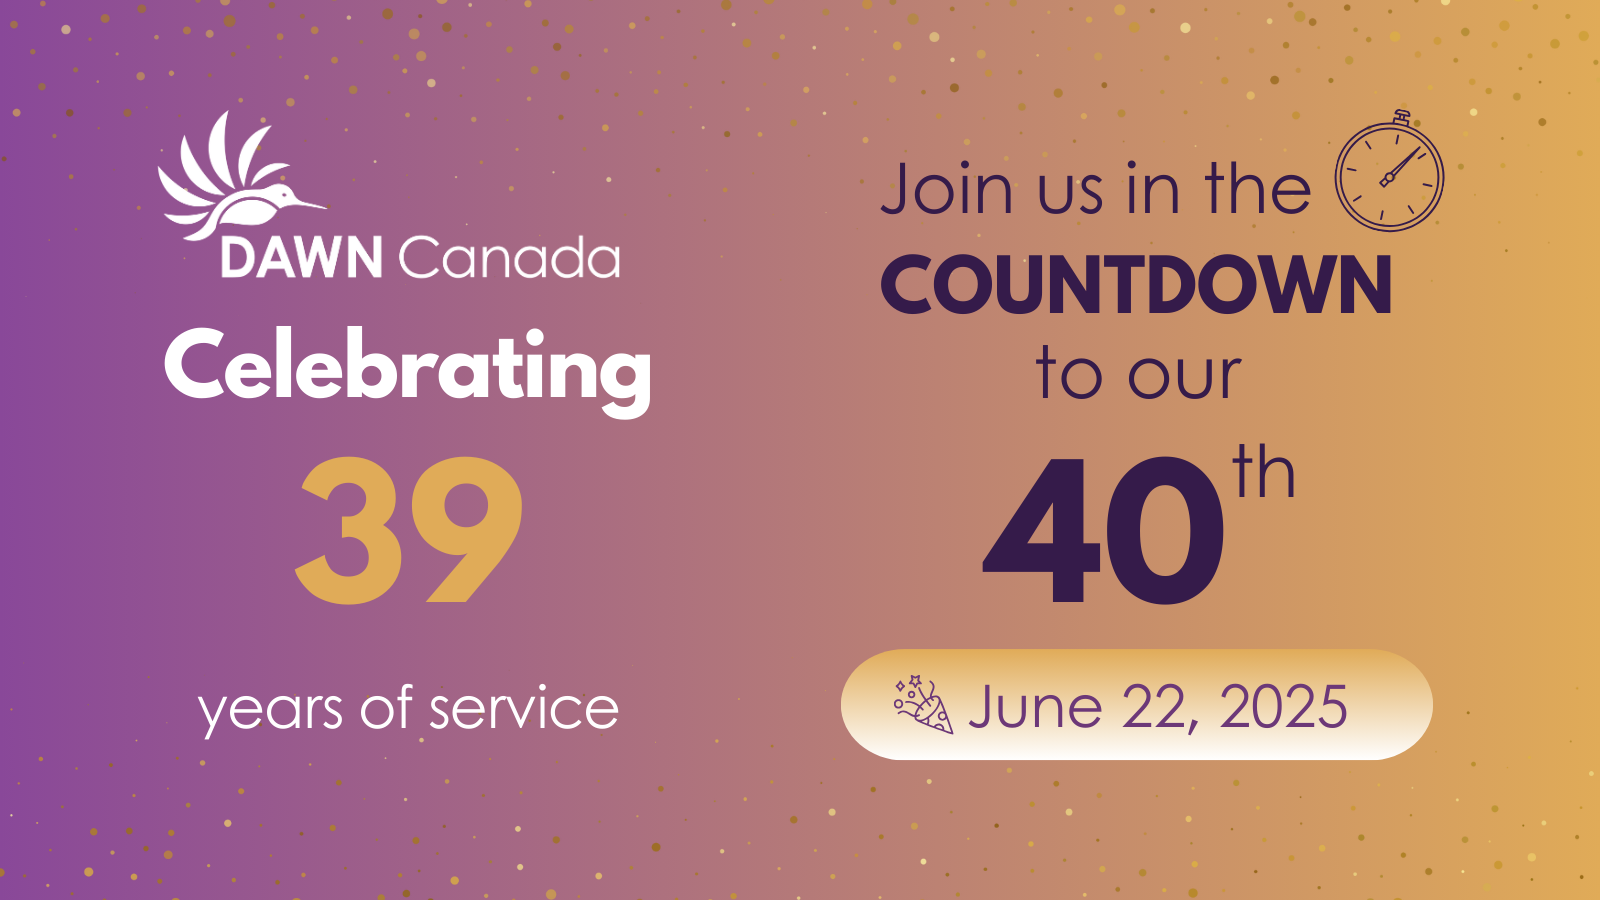 Promotional image for DAWN Canada celebrating 39 years of service with a countdown to their 40th anniversary on June 22, 2025. The image features celebratory graphics, a purple and orange gradient background, and text highlighting the event details.